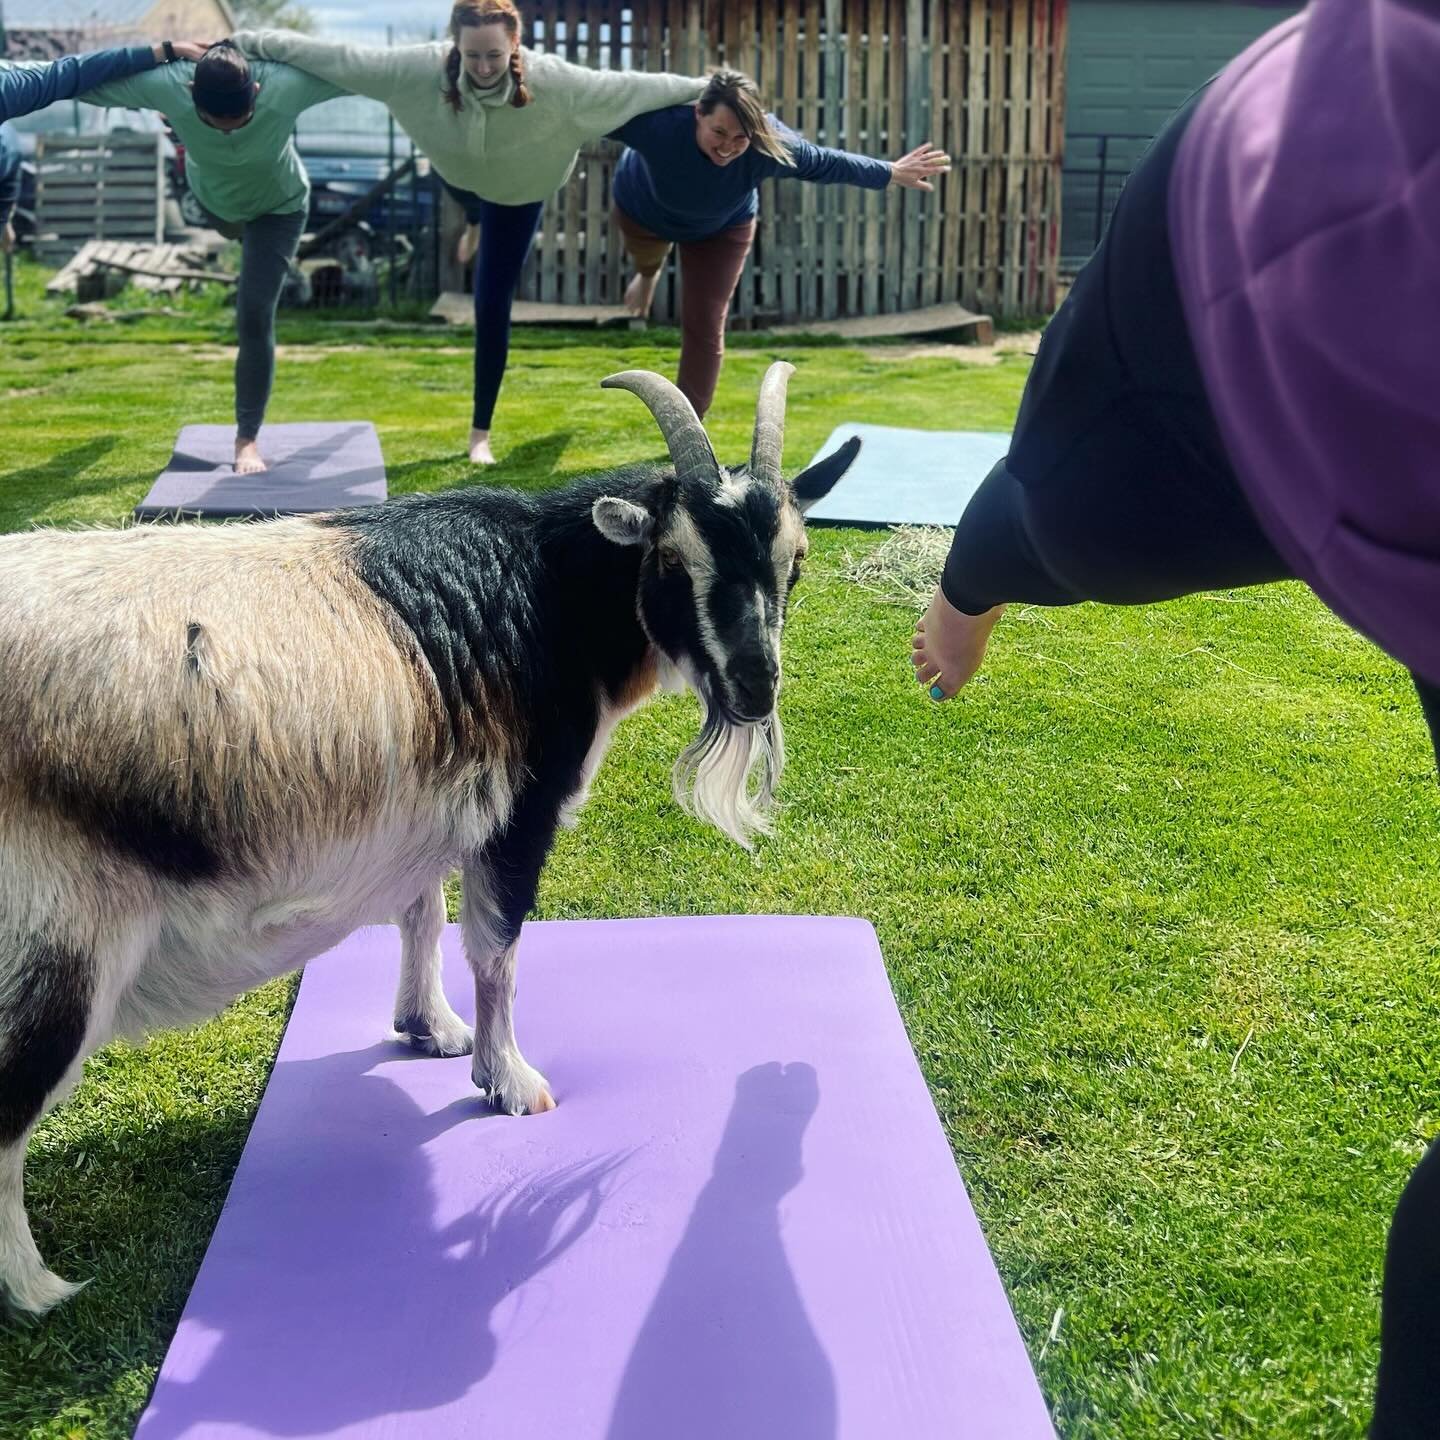 Today&rsquo;s official Season Opener was full of bright shiny energy! Thank you for joining us! 😎 

#boisegoatyoga